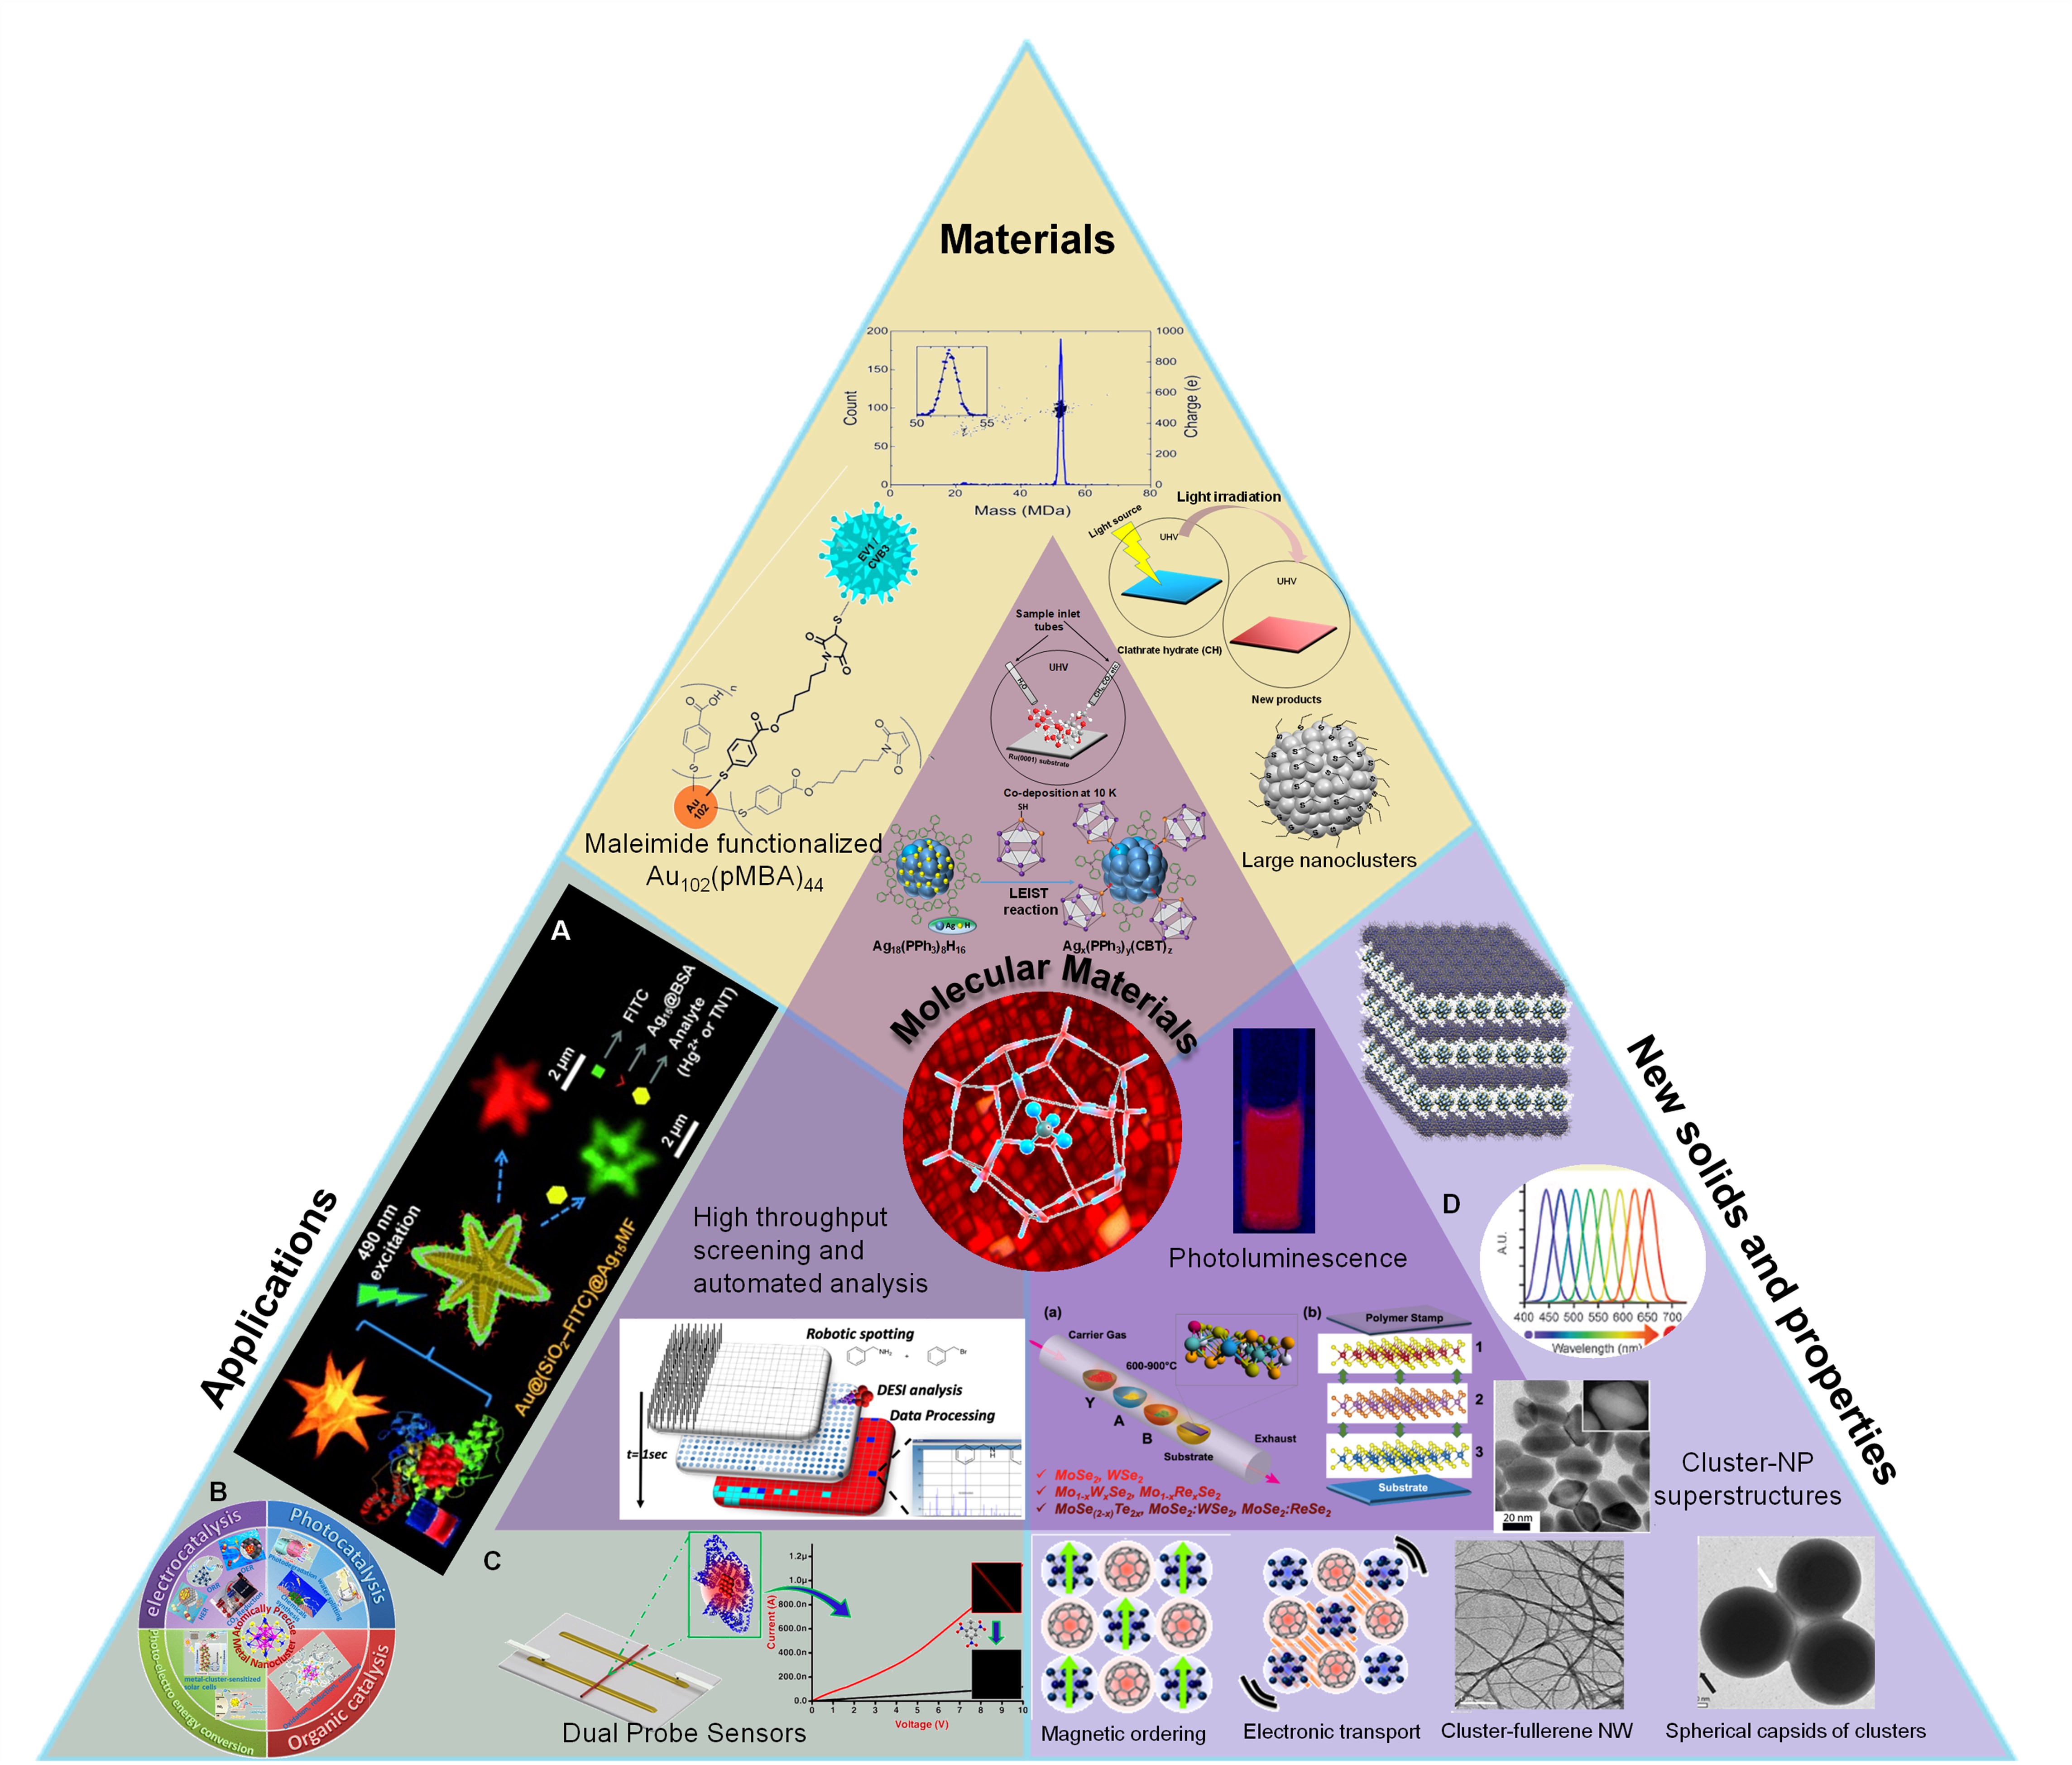 Centre of Excellence on Molecular Materials and Functions